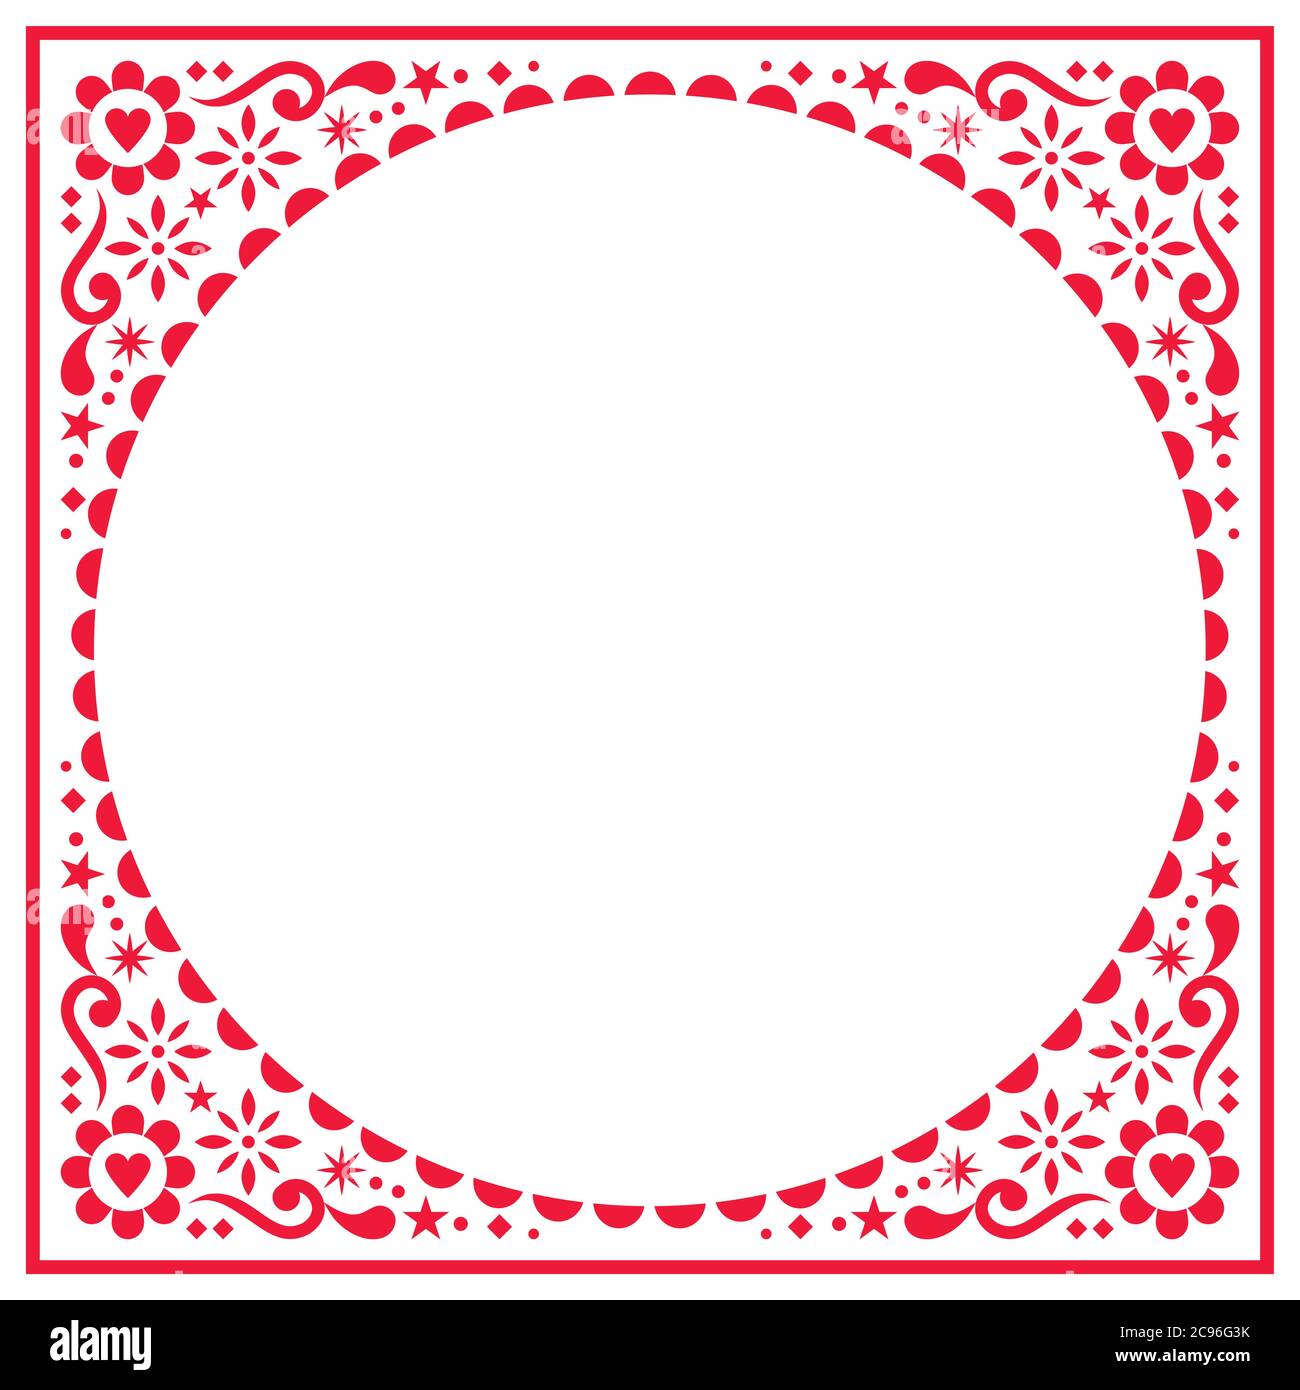 Scandinavian folk greeting card or wedding invitation vector design, floral ethnic pattern in red on white Stock Vector